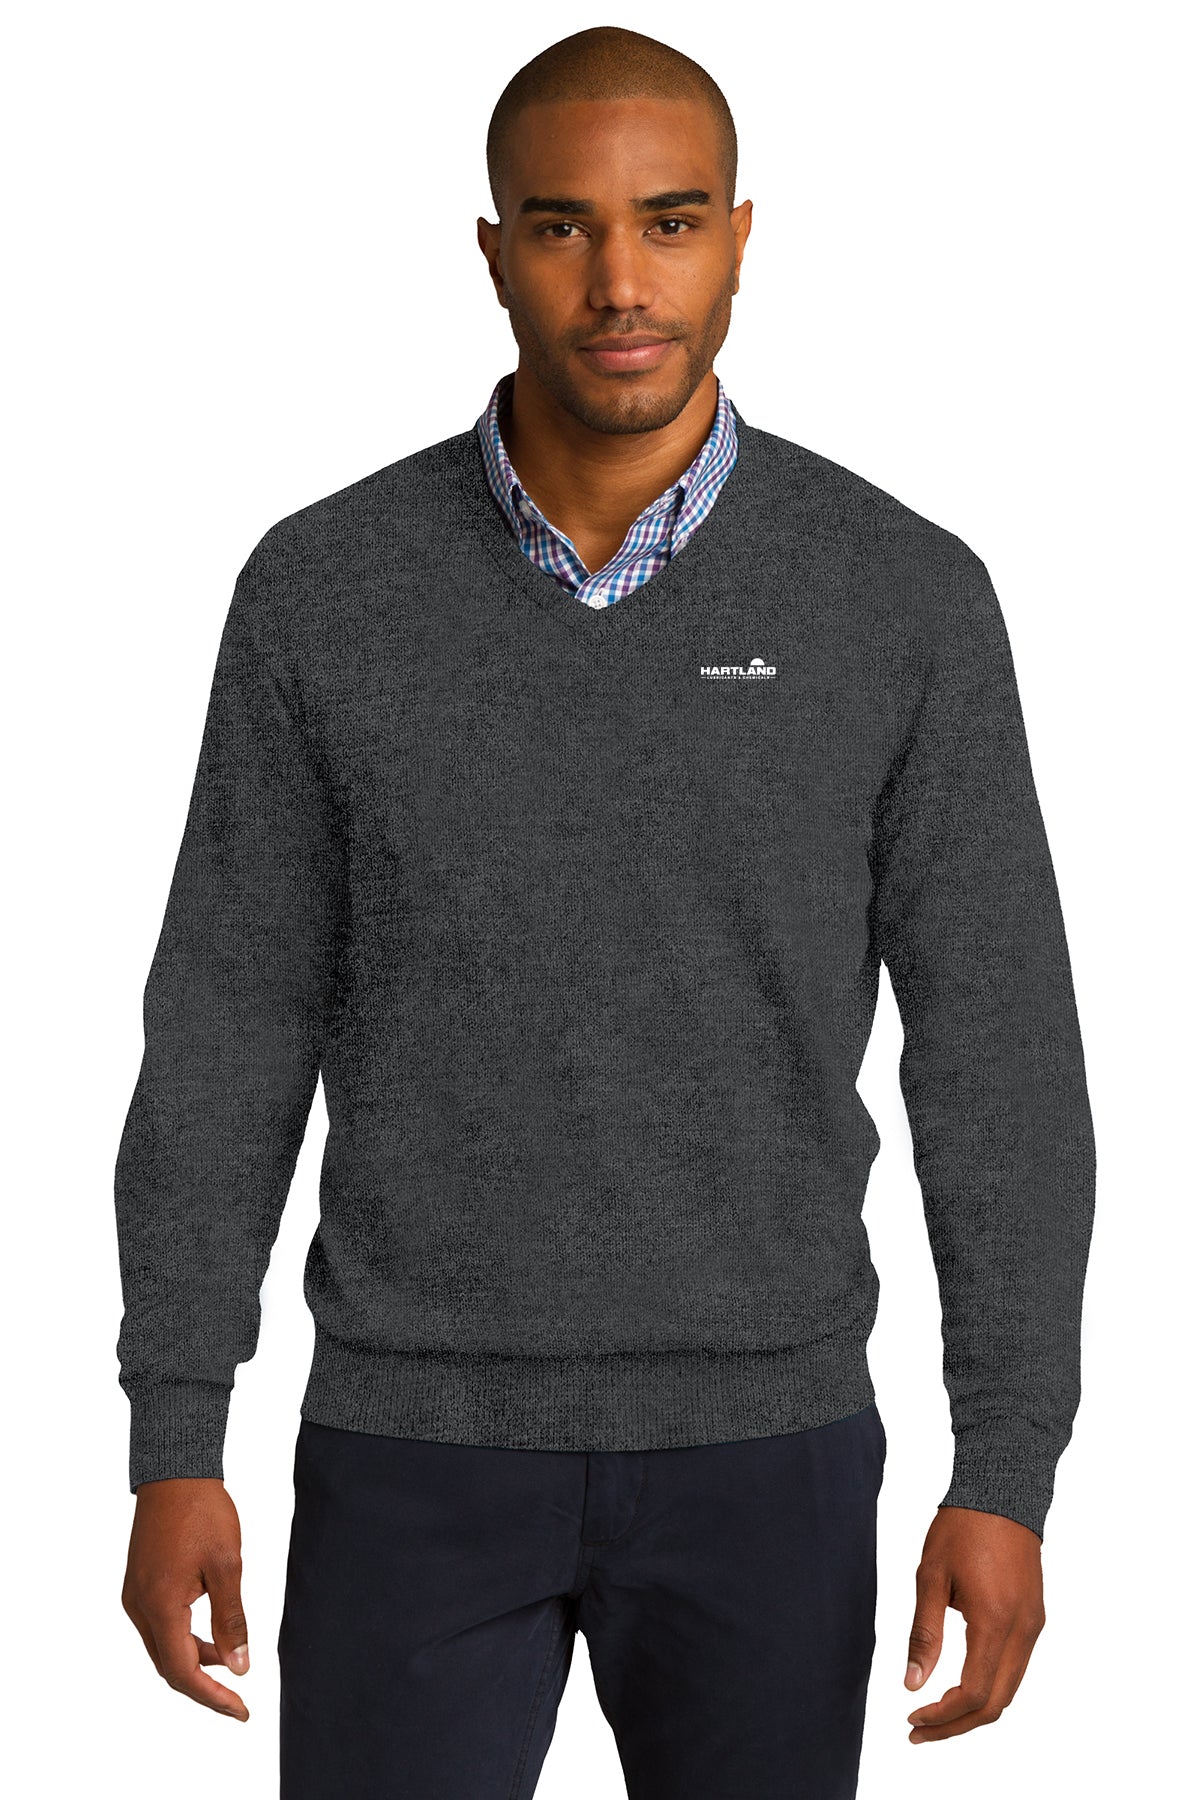 Hartland Lubricants and Chemicals V-Neck Sweater